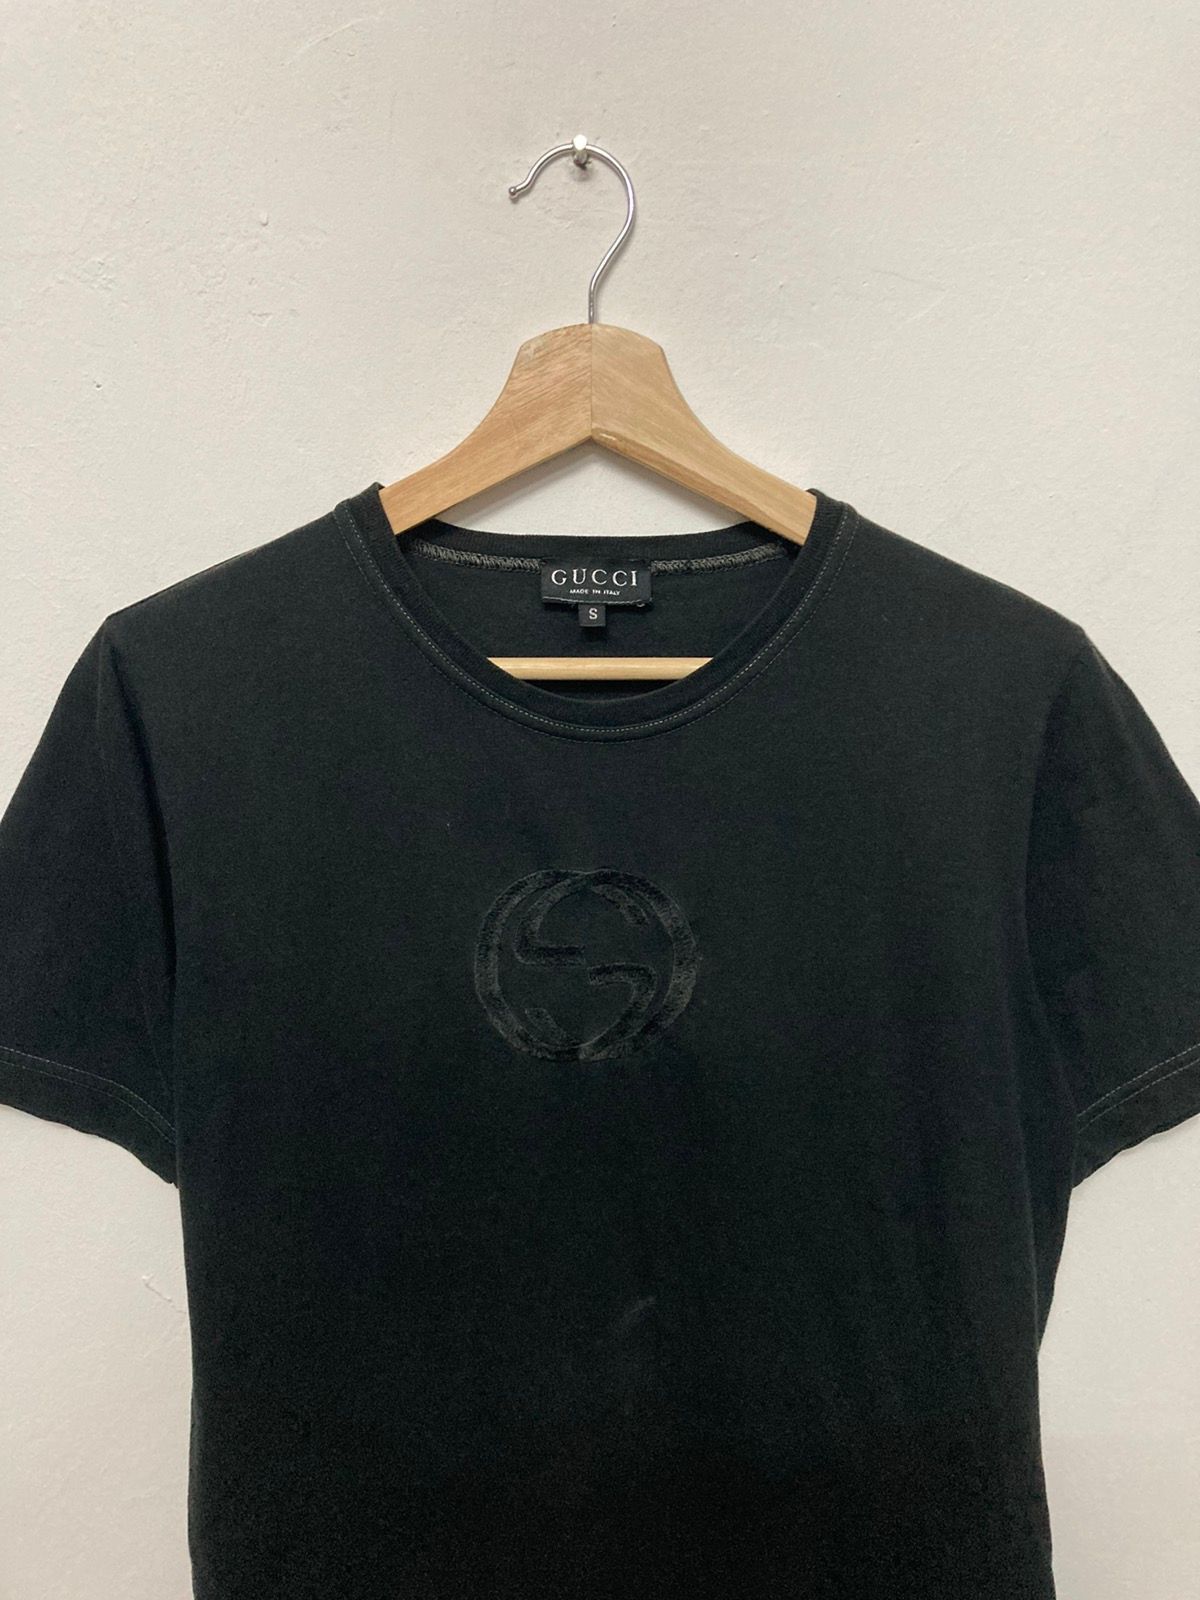 Gucci Embroidery Big Logo Shirt Made in Italy - 7